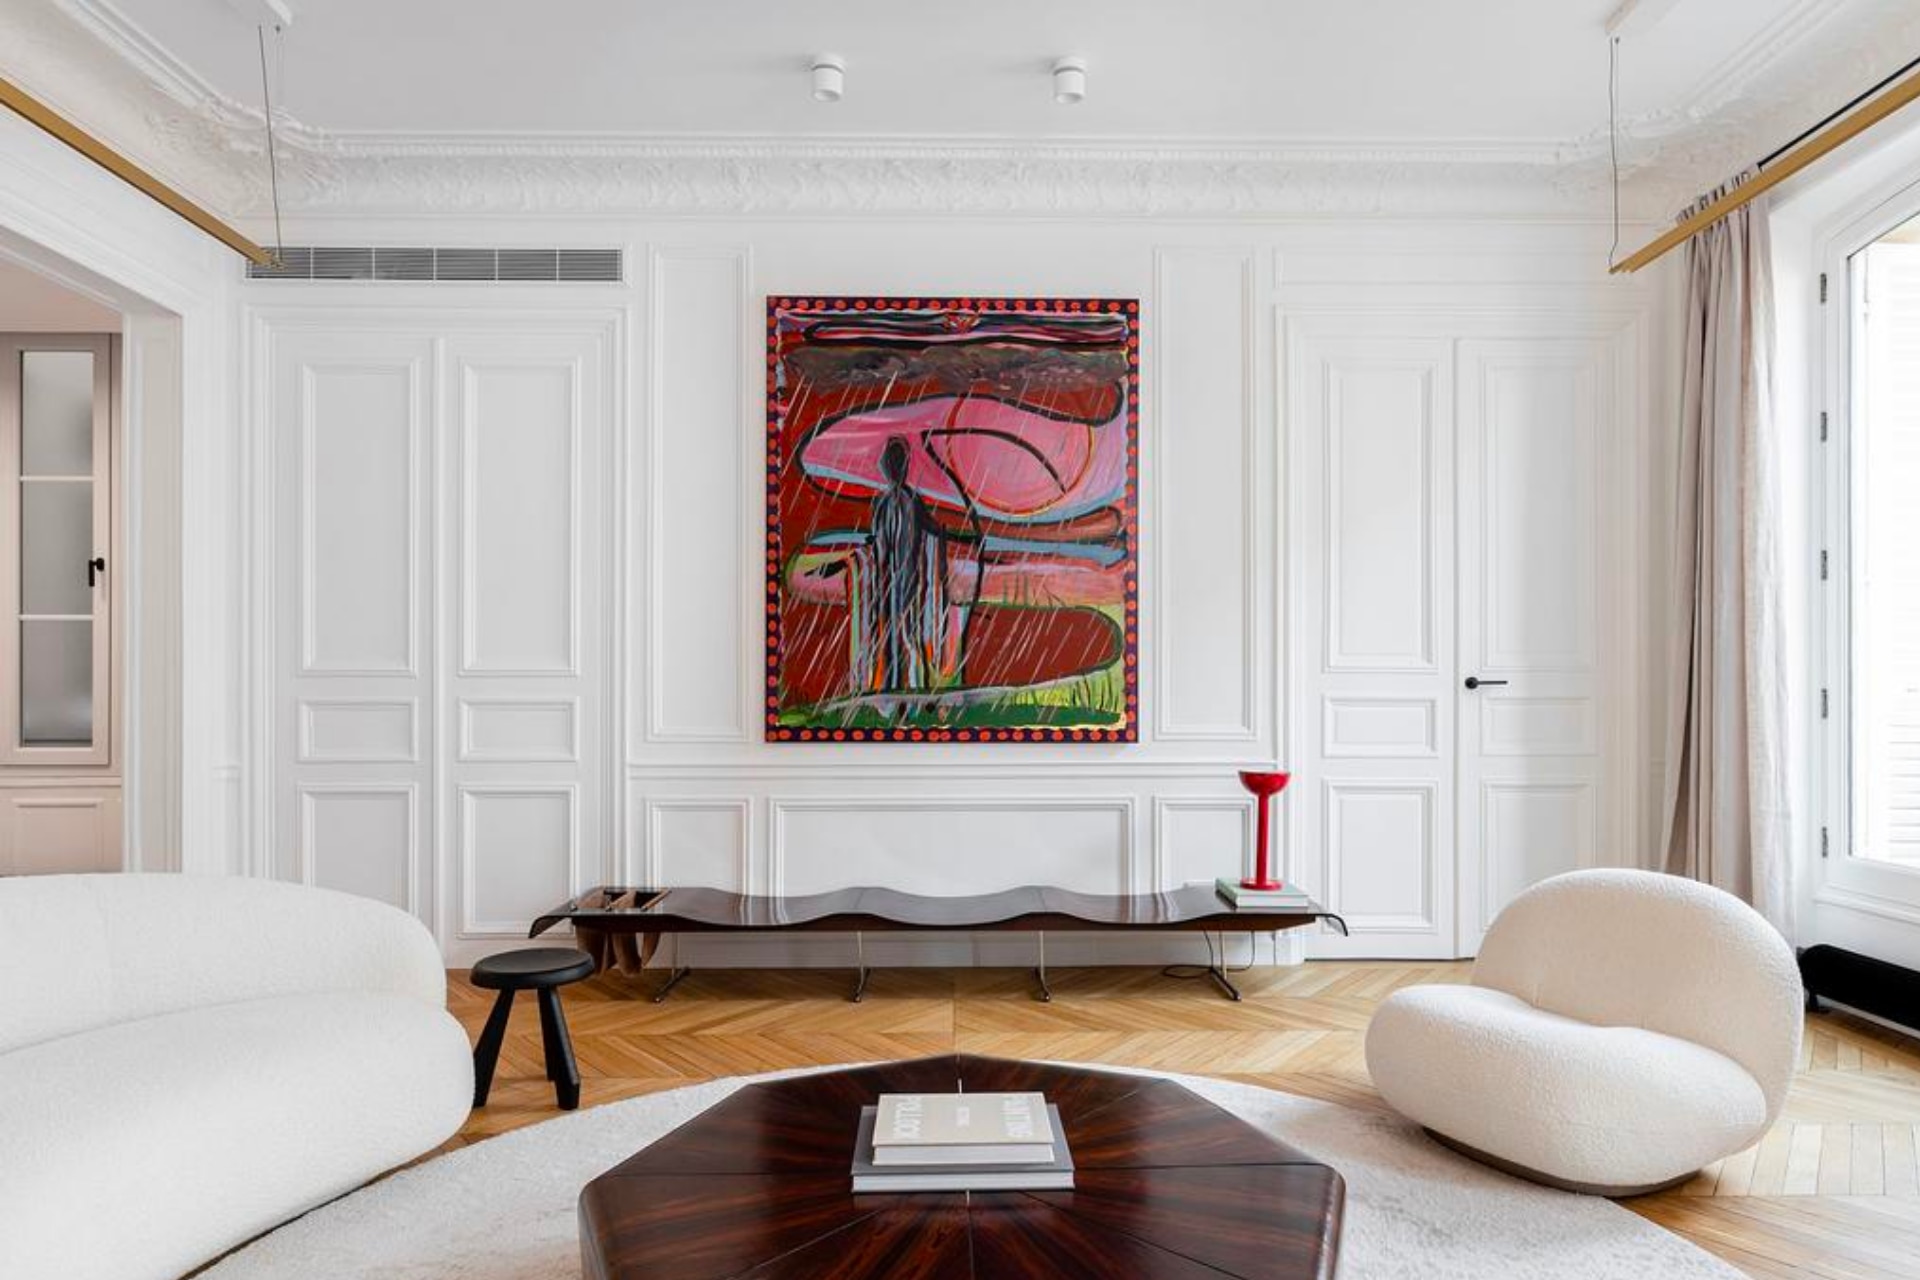 House tour: inside Coco Chanel's historic and art-filled Paris